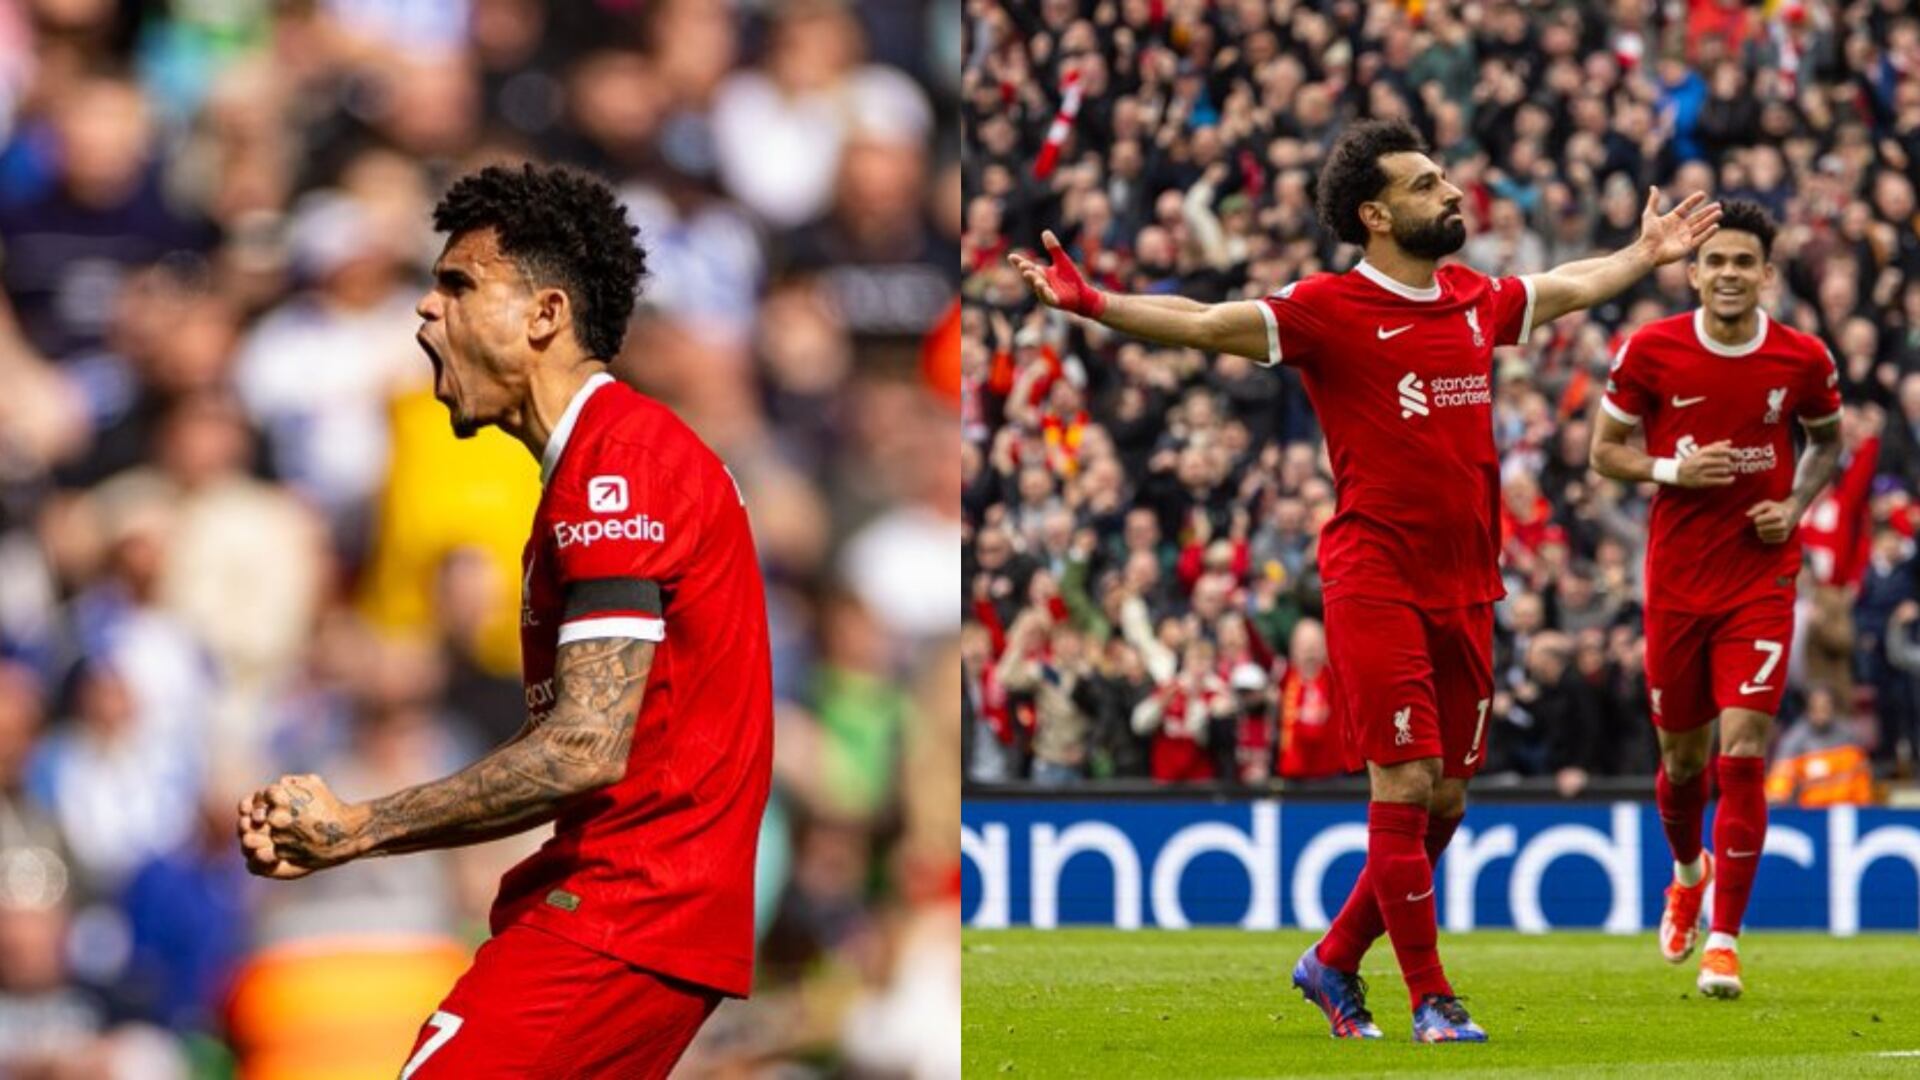 Comeback at Anfield! Diaz and Salah score for Liverpool in a crucial PL game